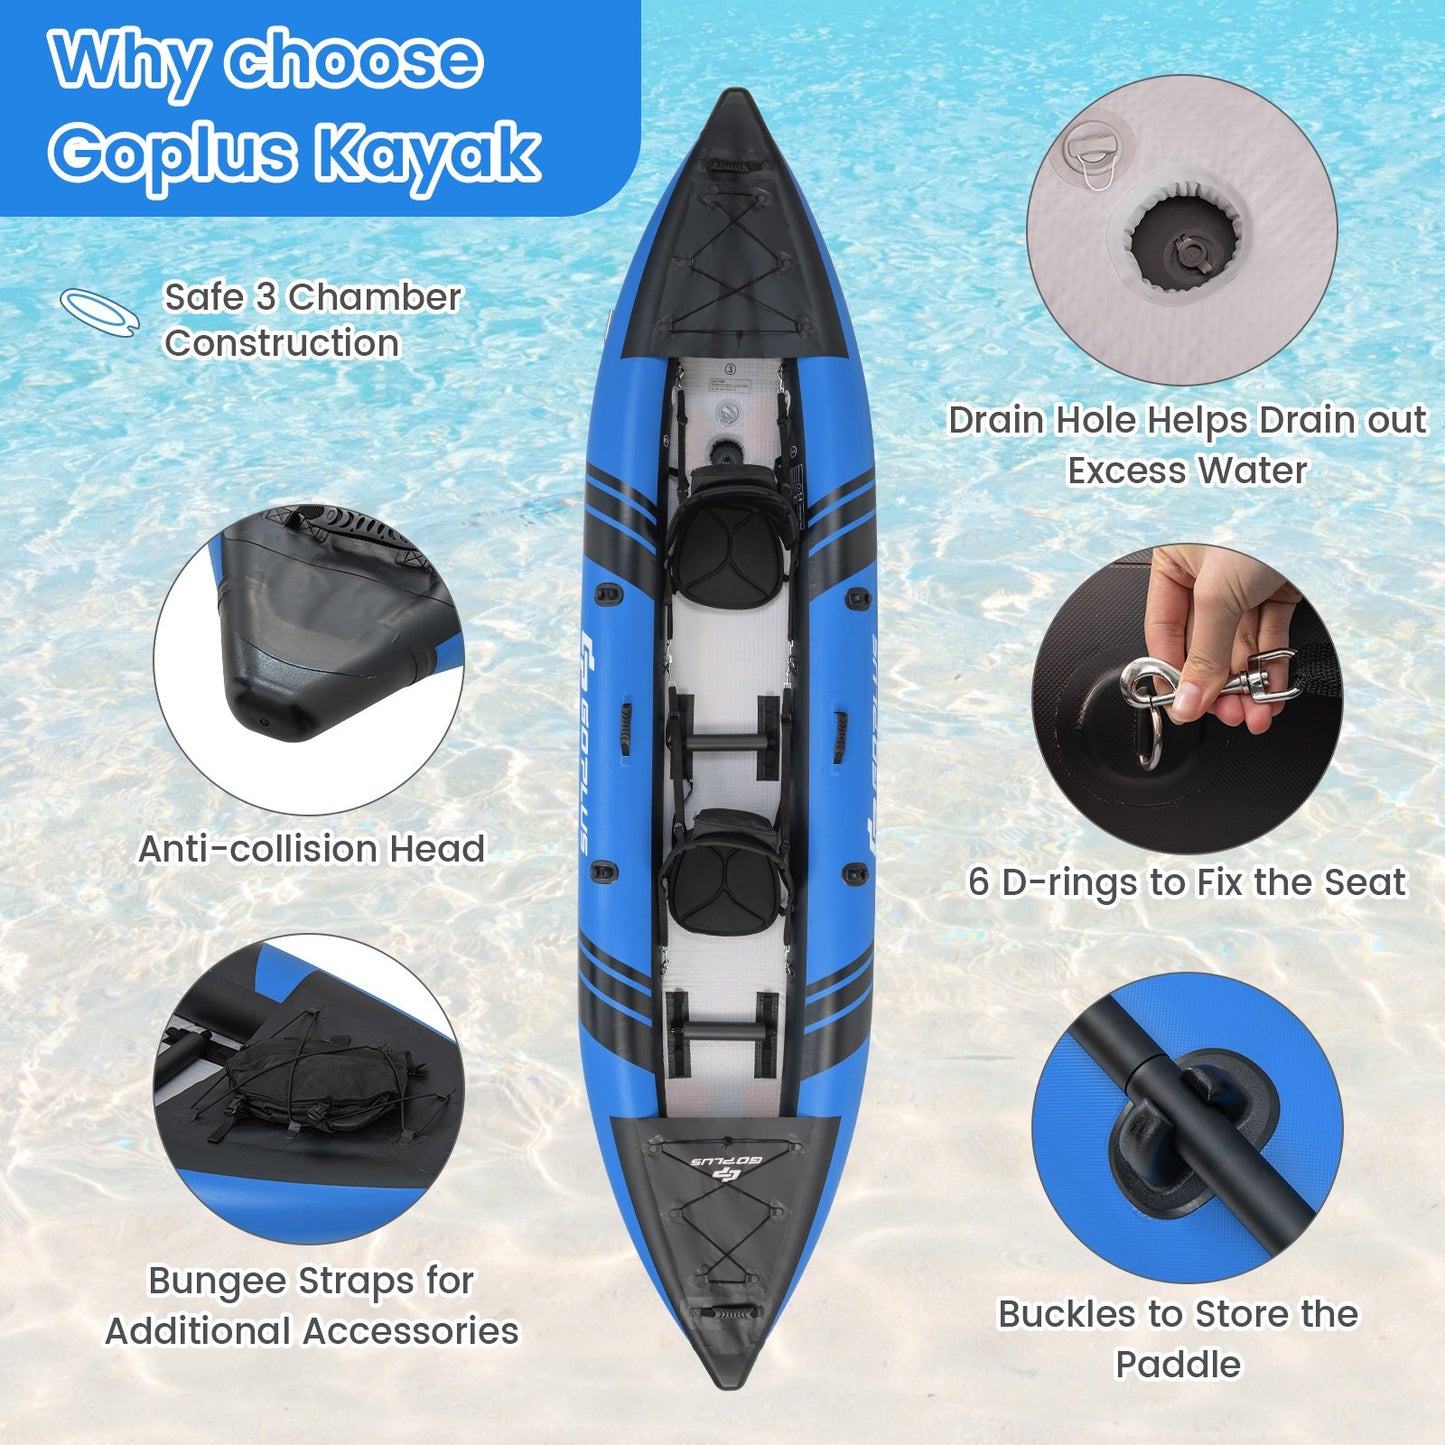 Inflatable 2-person Kayak Set with Aluminium Oars and Repair Kit, Blue